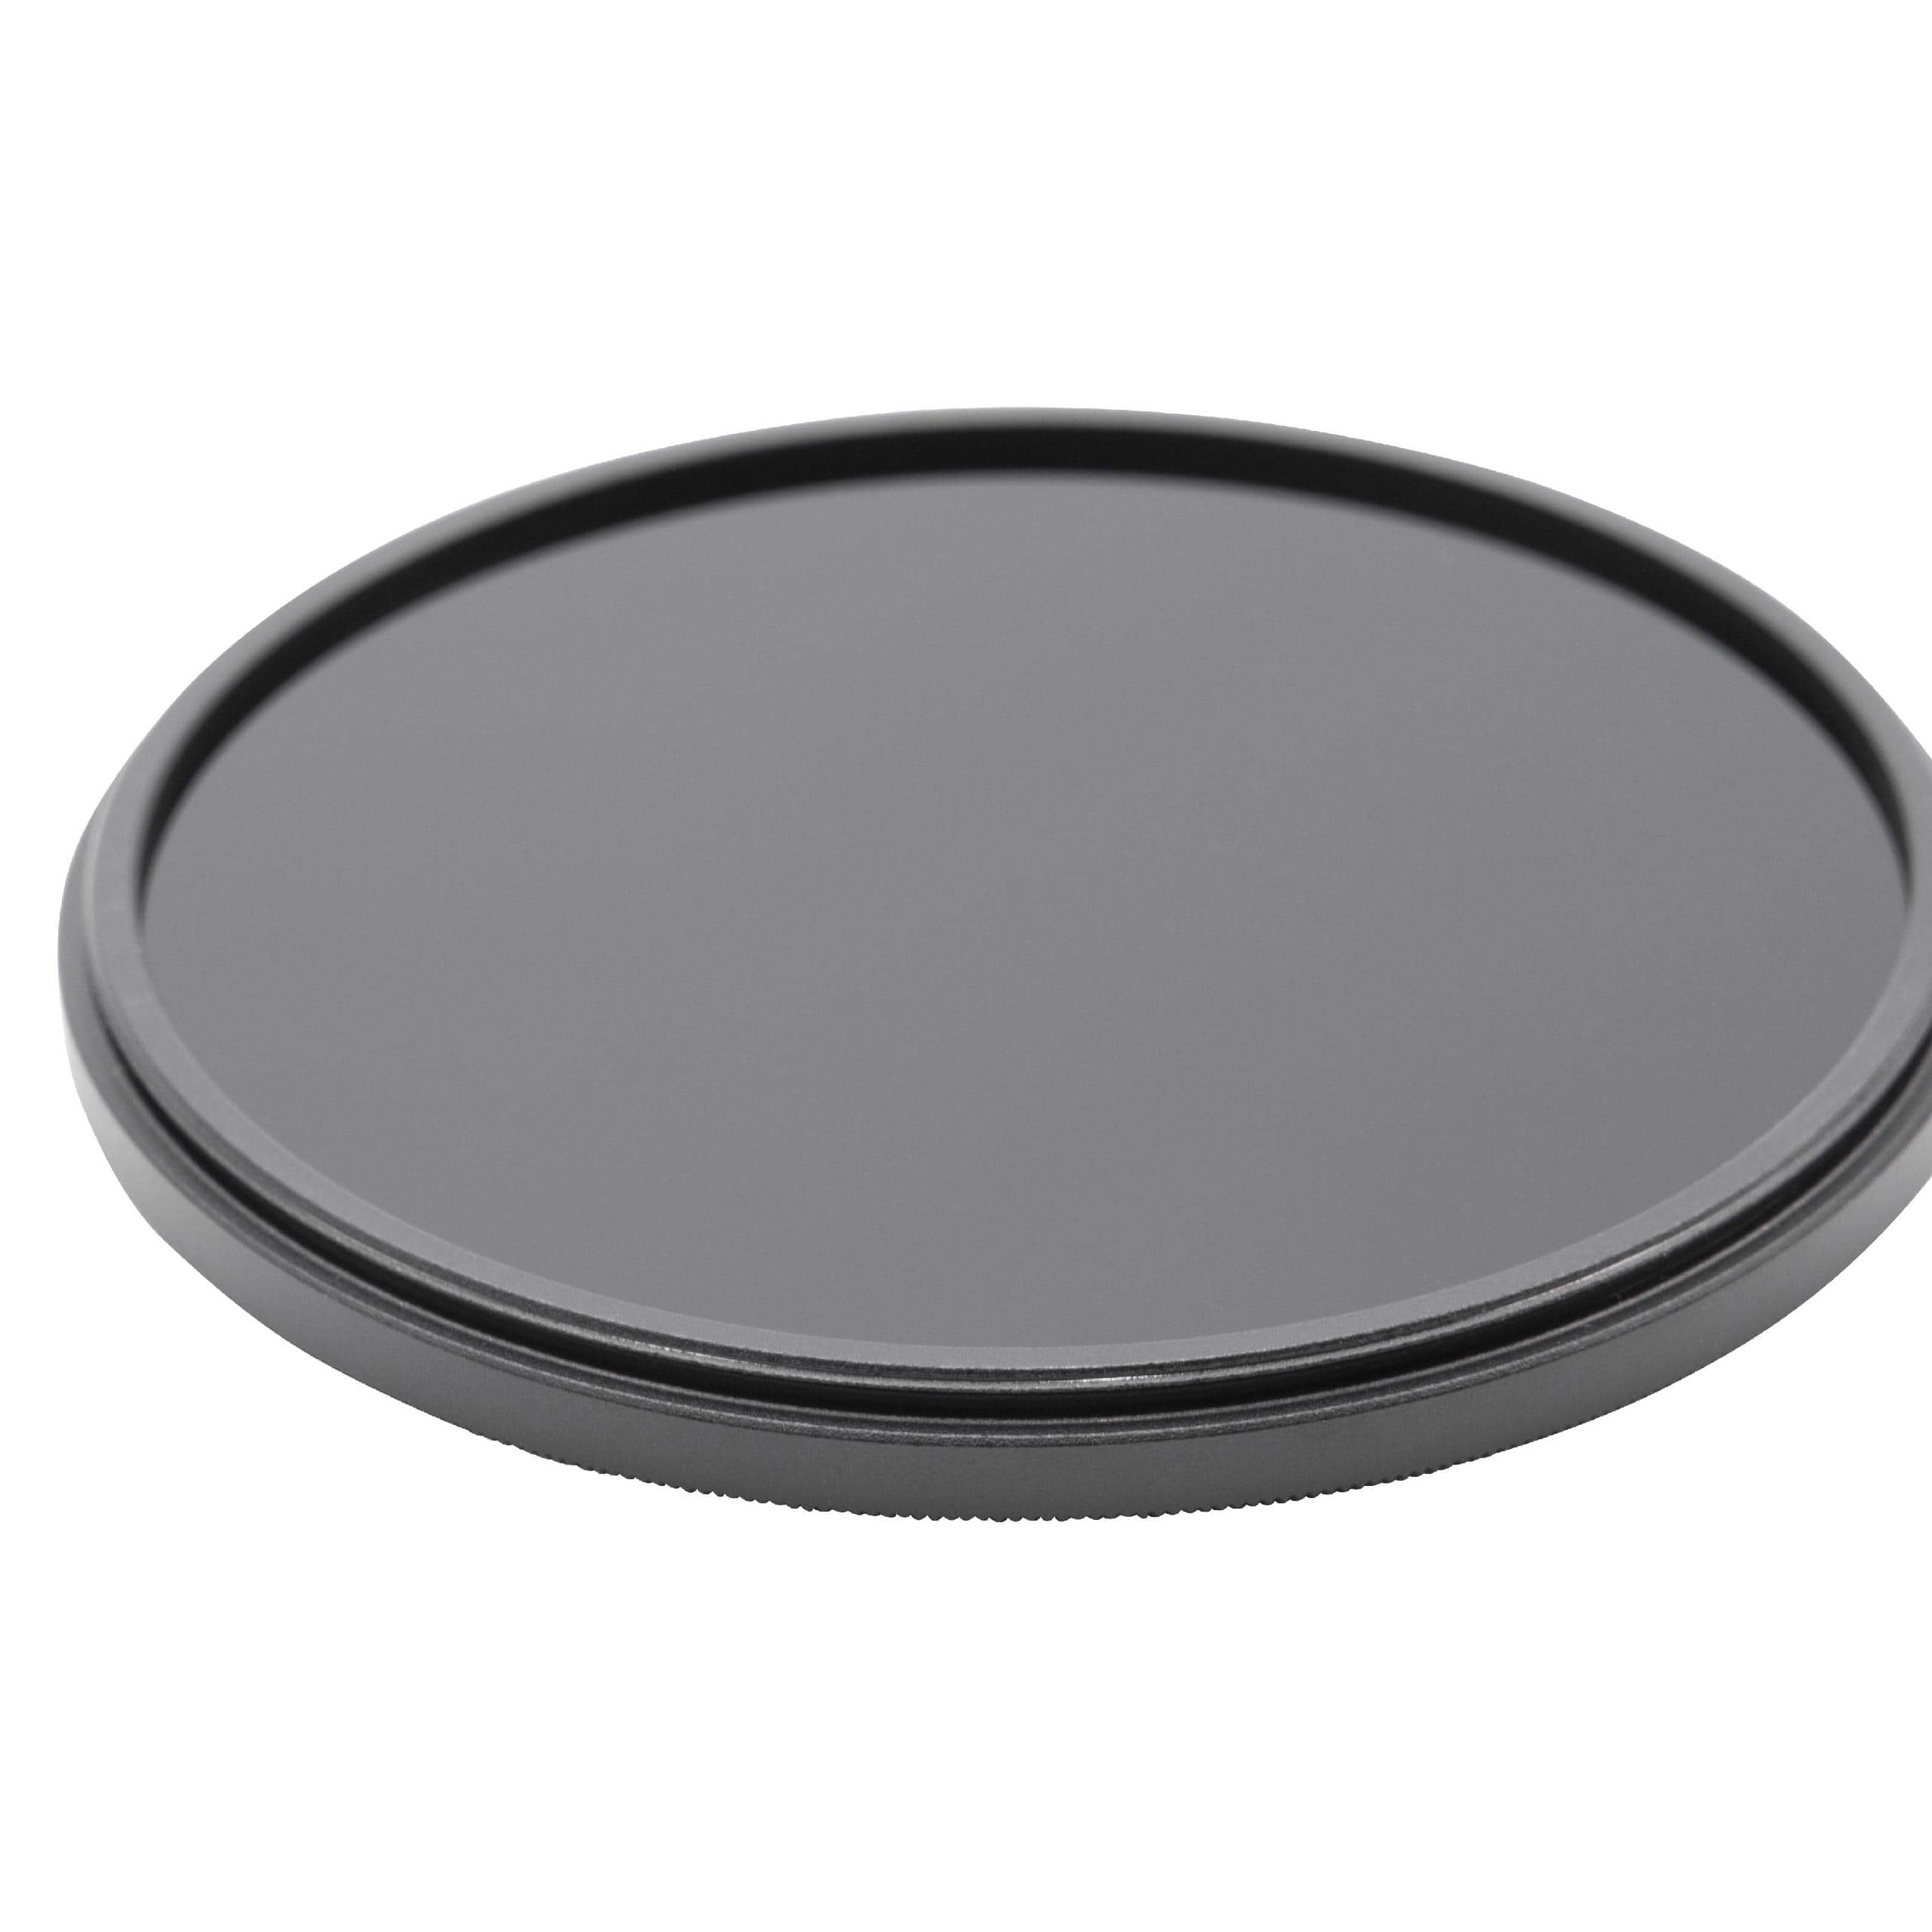 Universal ND Filter ND 1000 suitable for Camera Lenses with 77 mm Filter Thread - Grey Filter